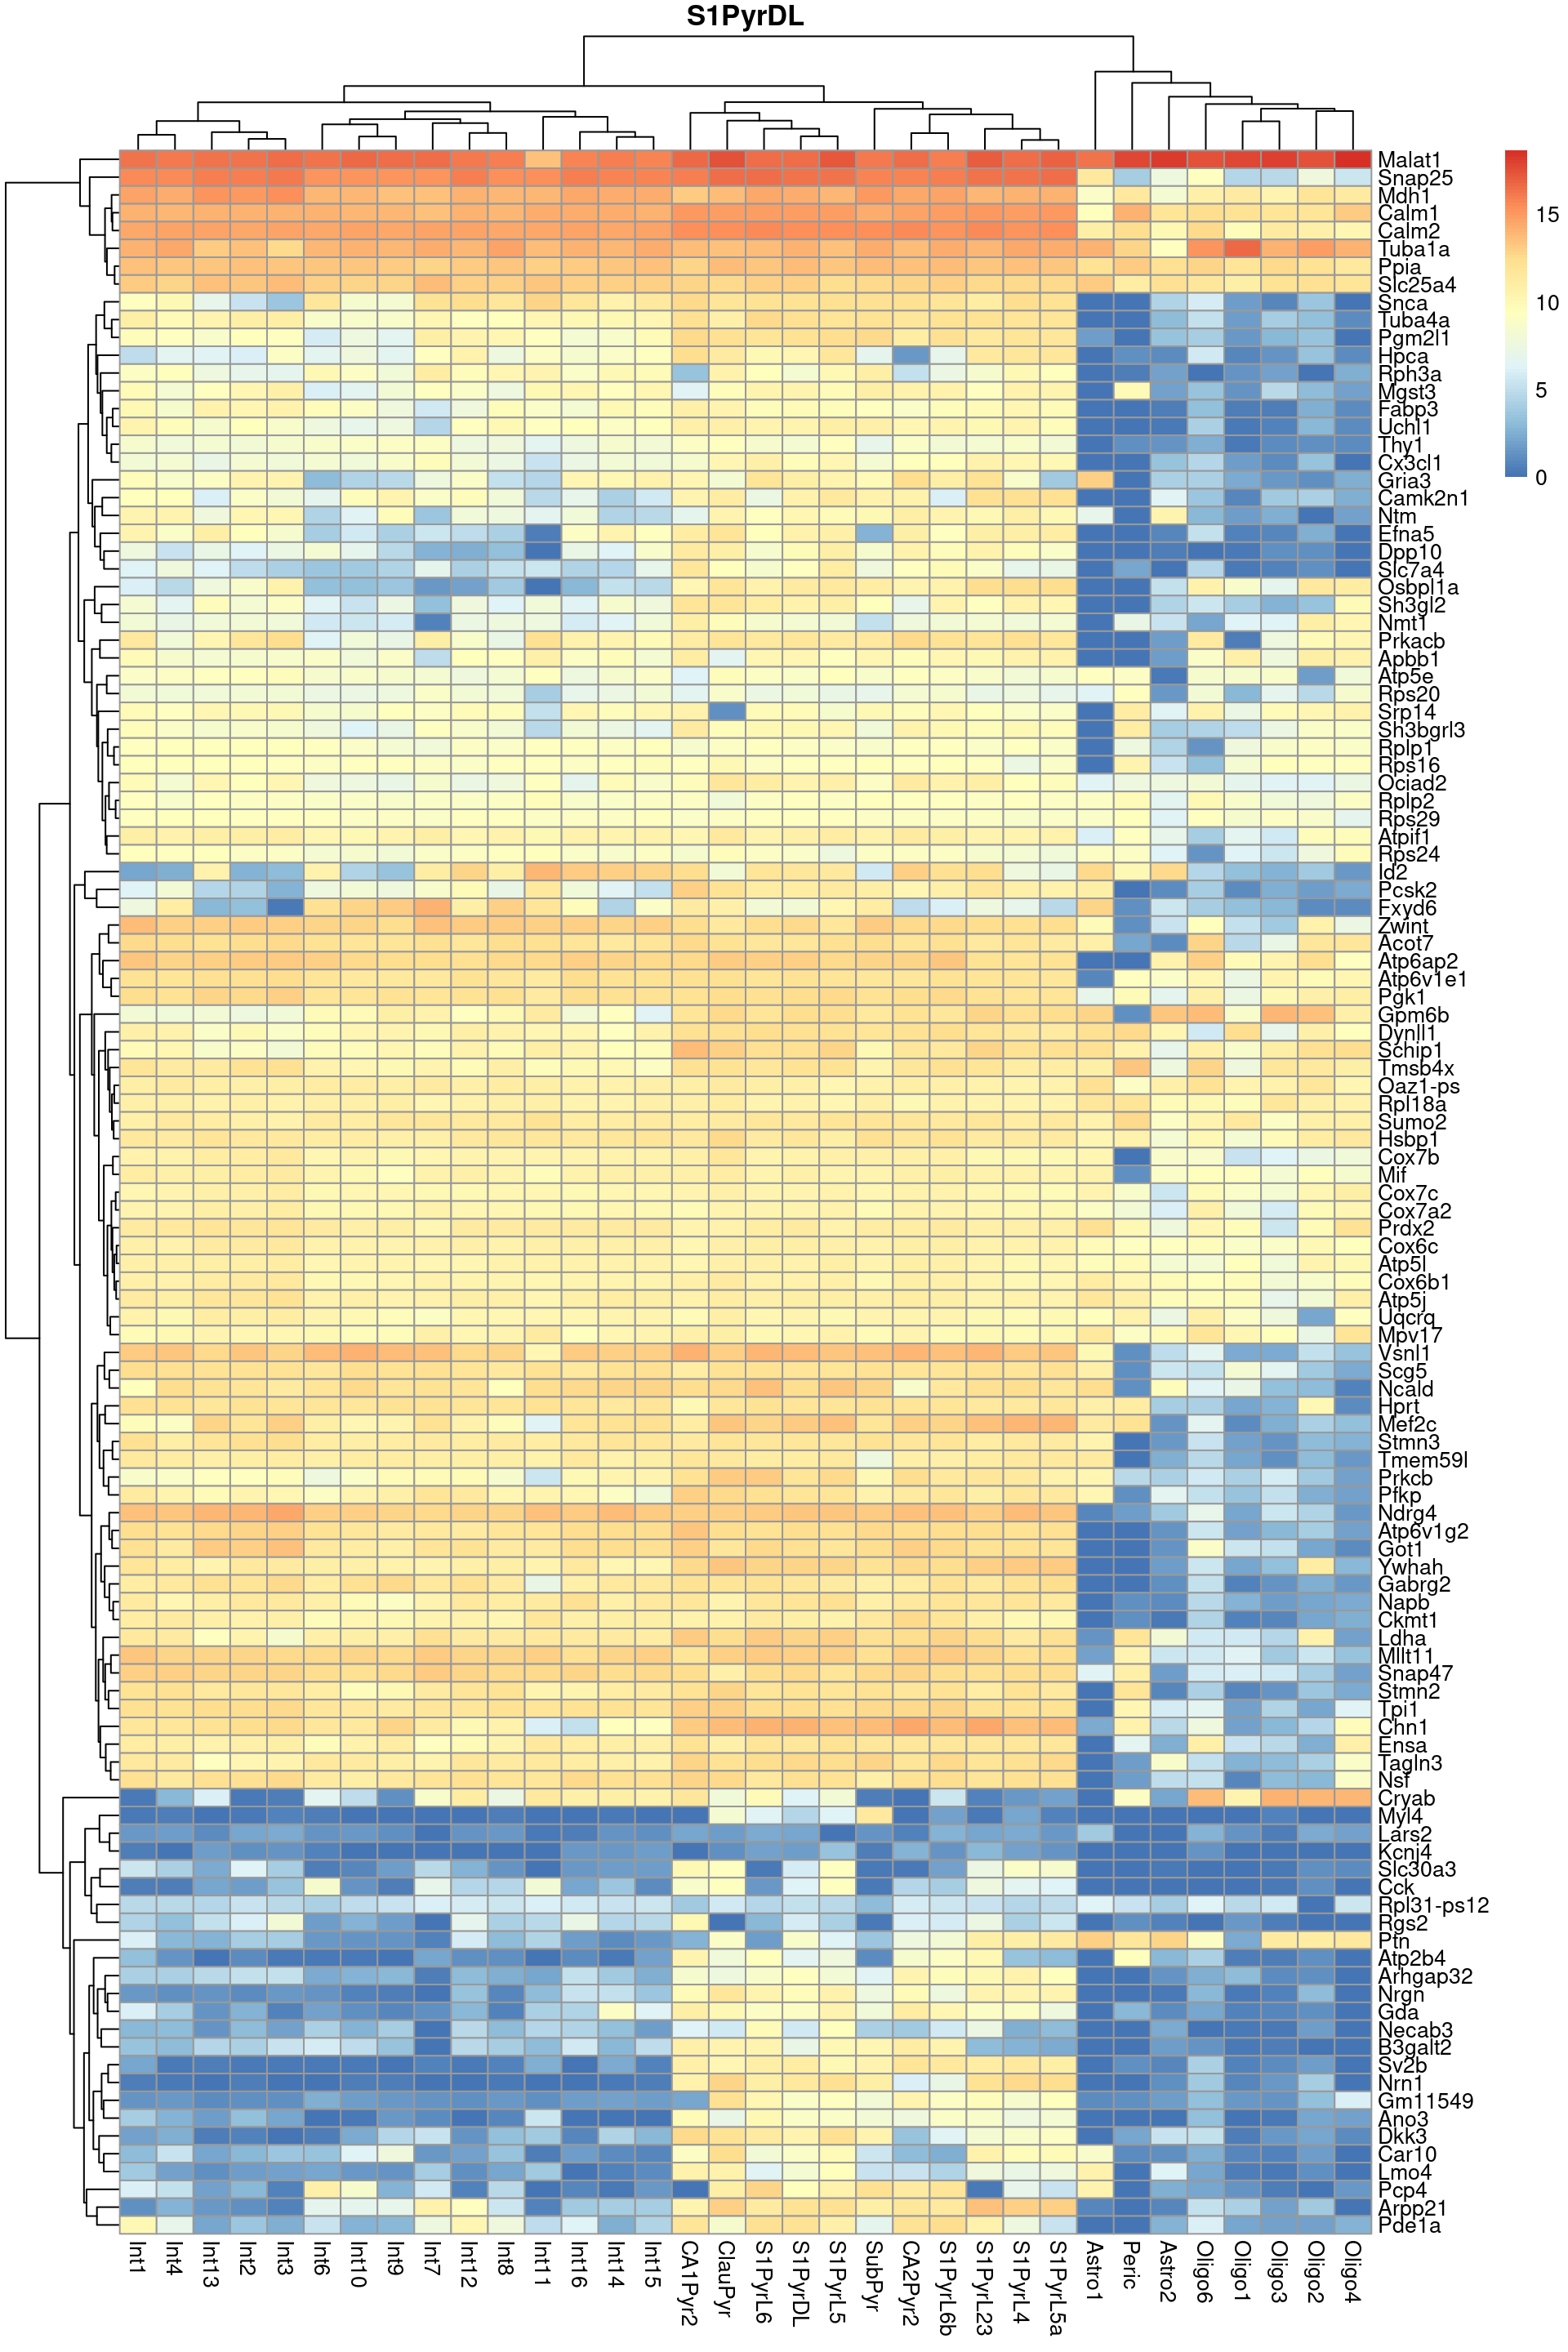 Heatmap of log-expression values in the Tasic dataset for all marker genes upregulated in the most frequent label from the Zeisel reference dataset.